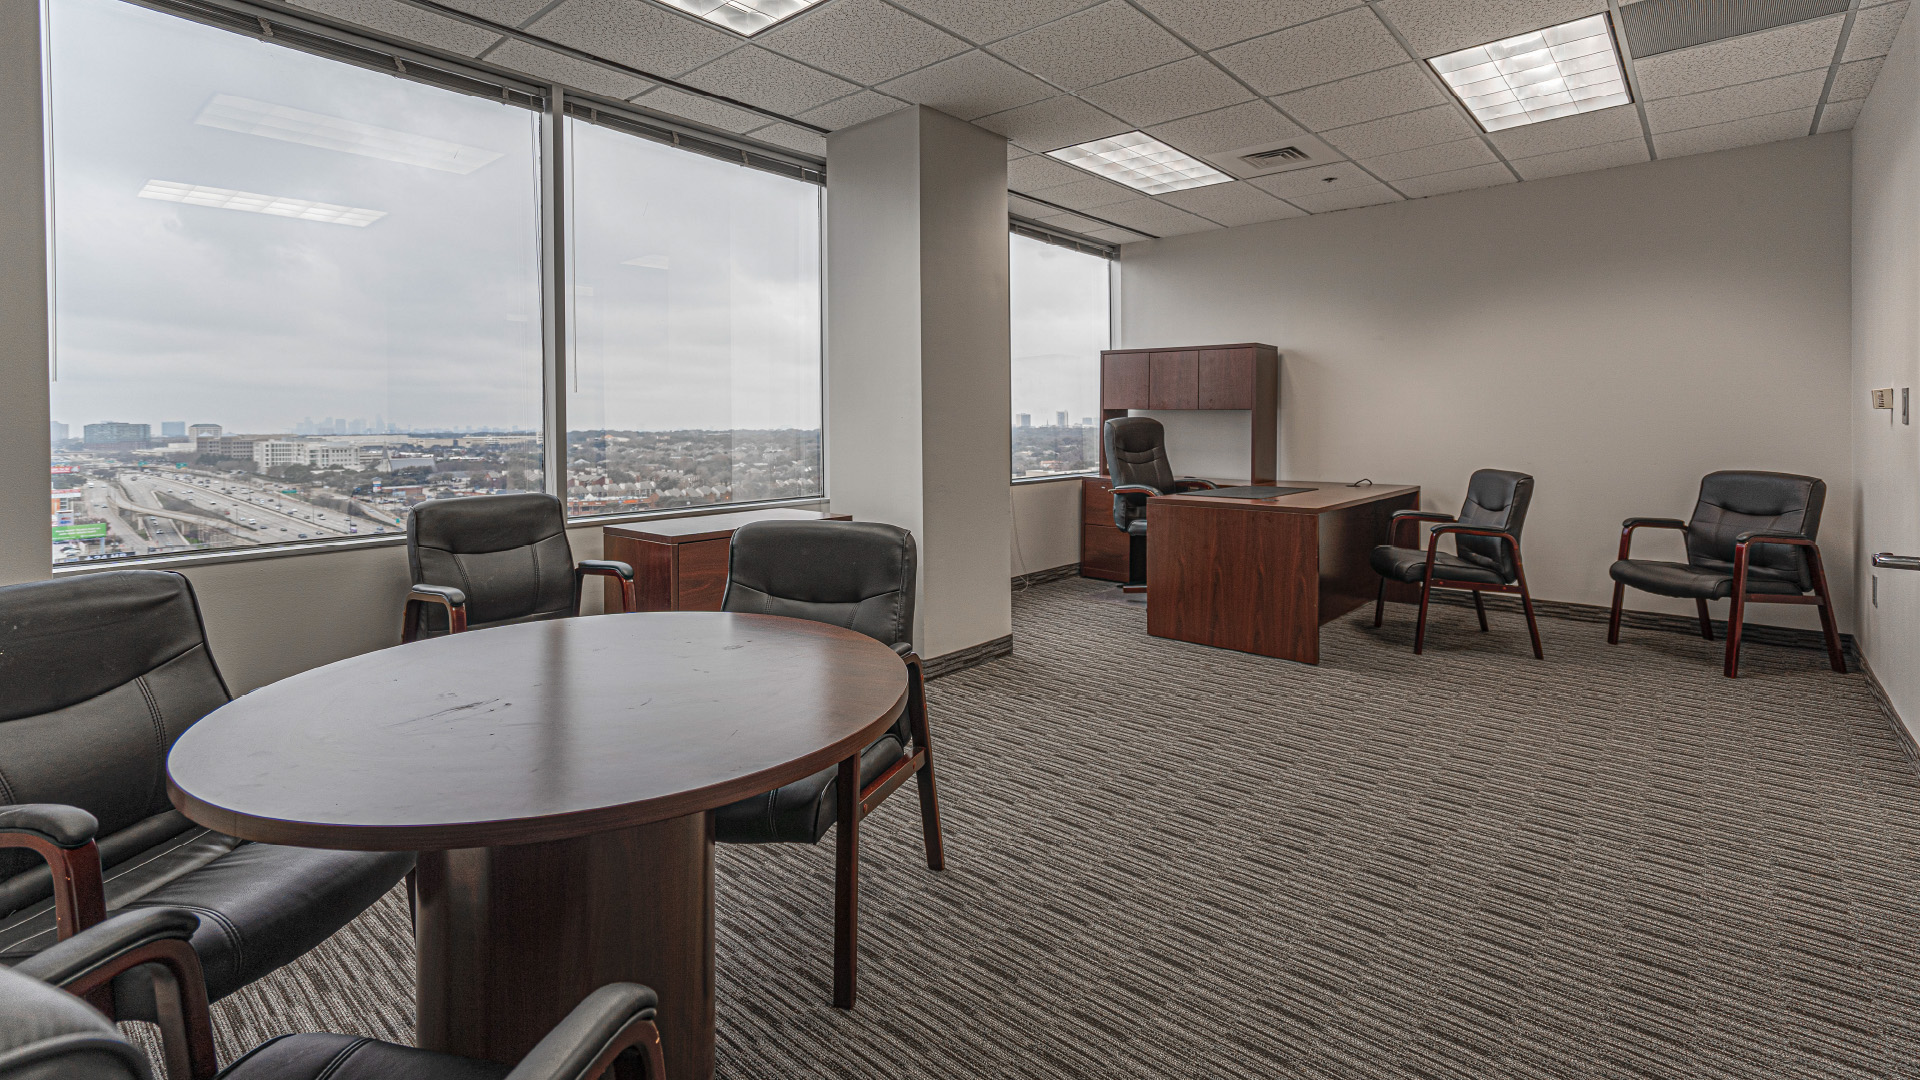 10000 N Central Expressway Office View